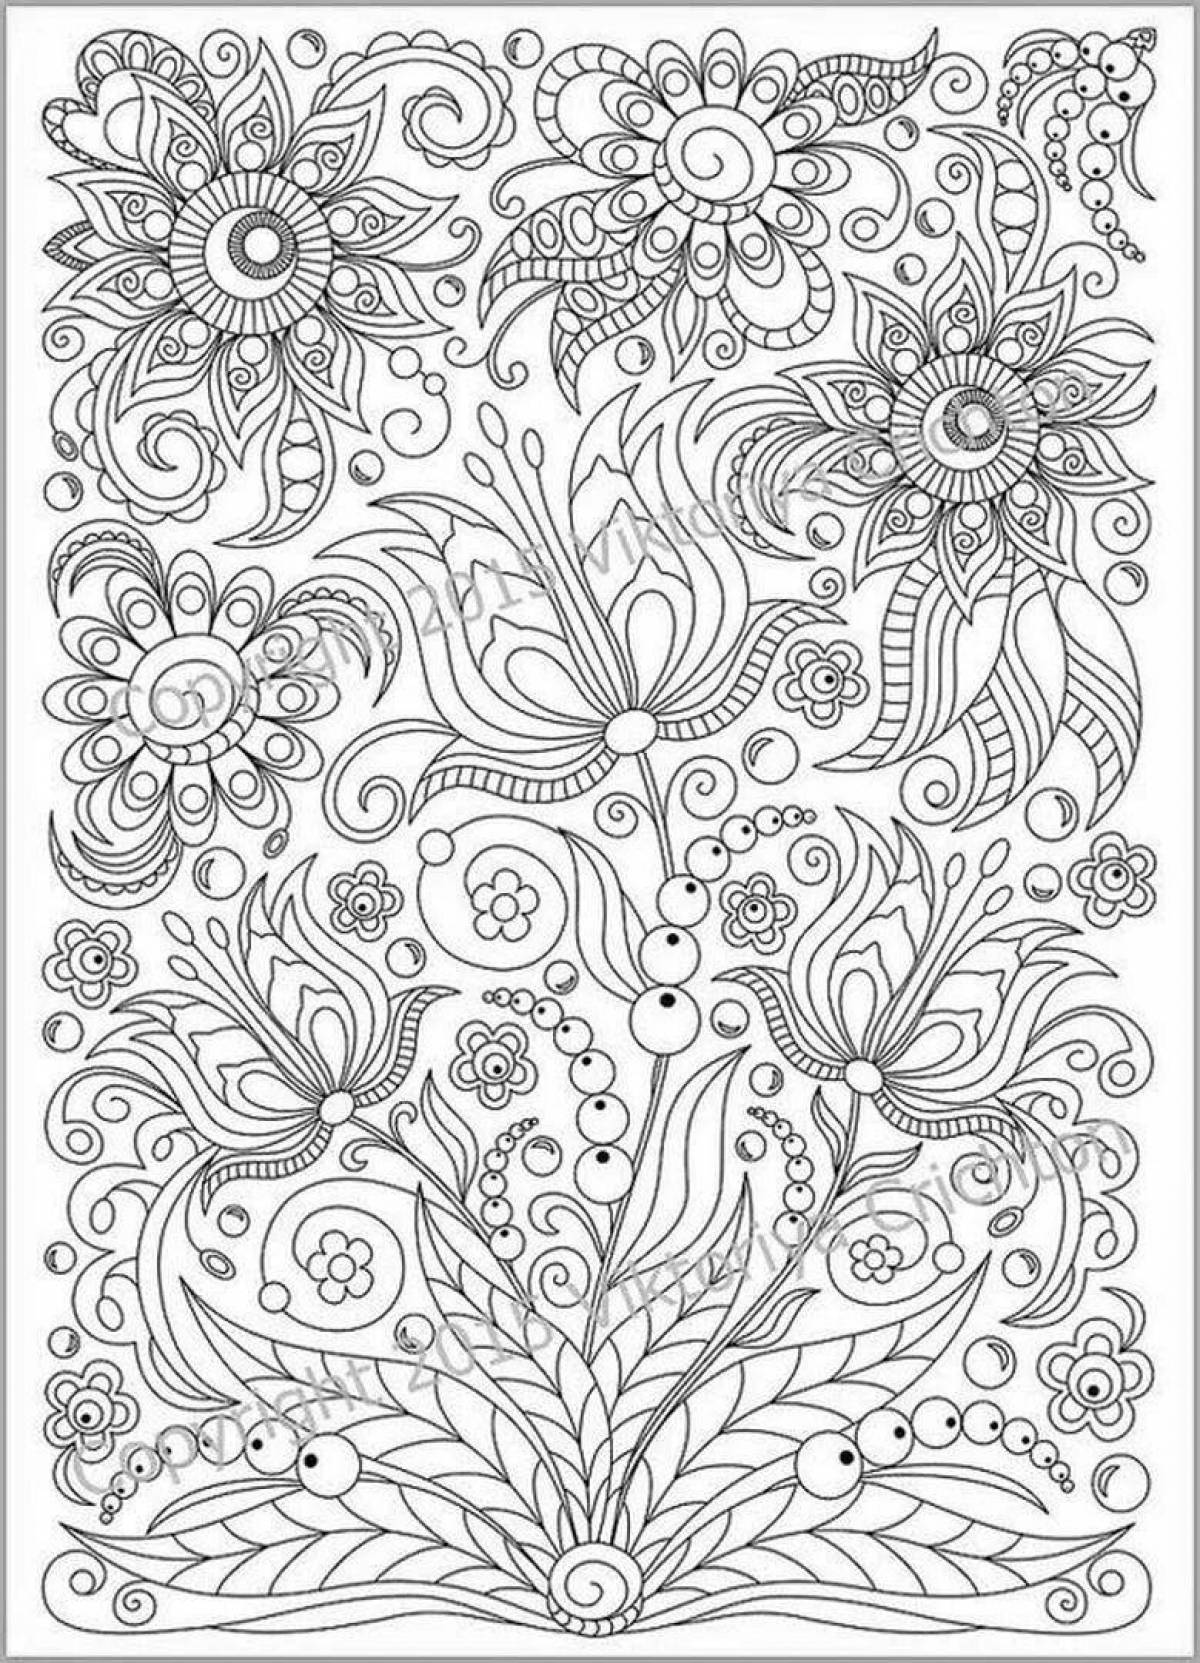 Fun coloring relax living patterns